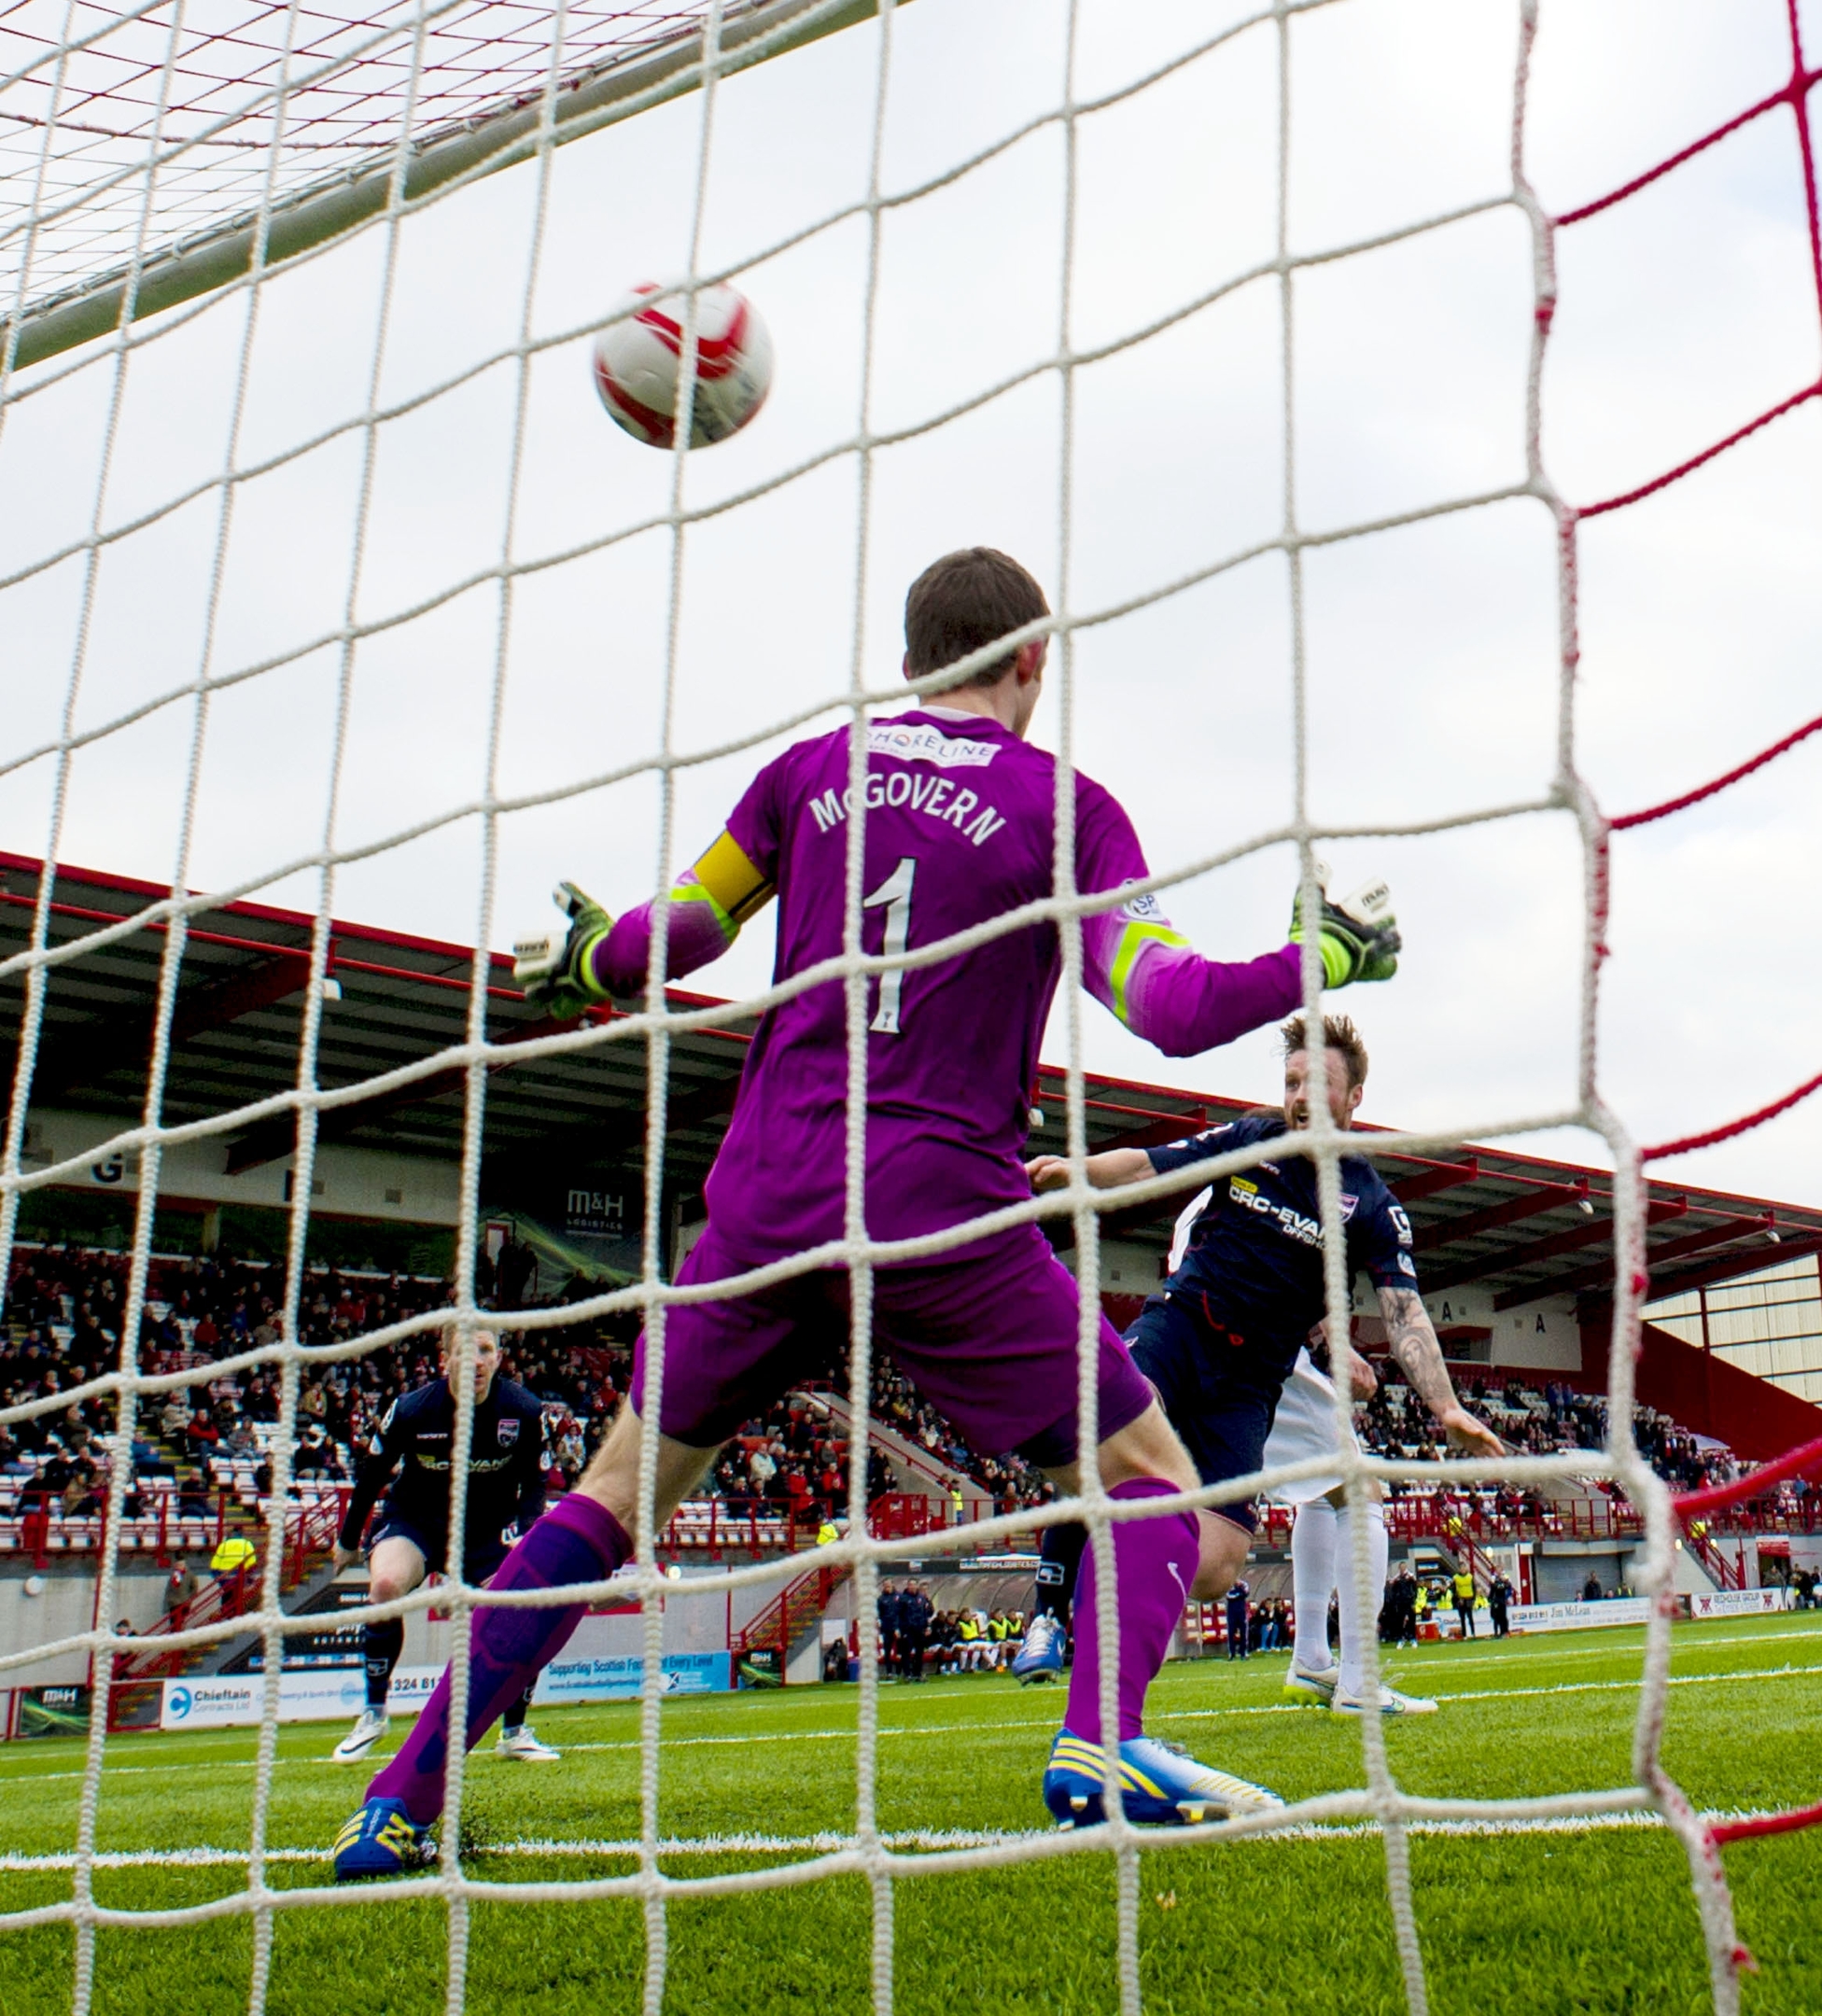 Craig Curran heads home for the Staggies 